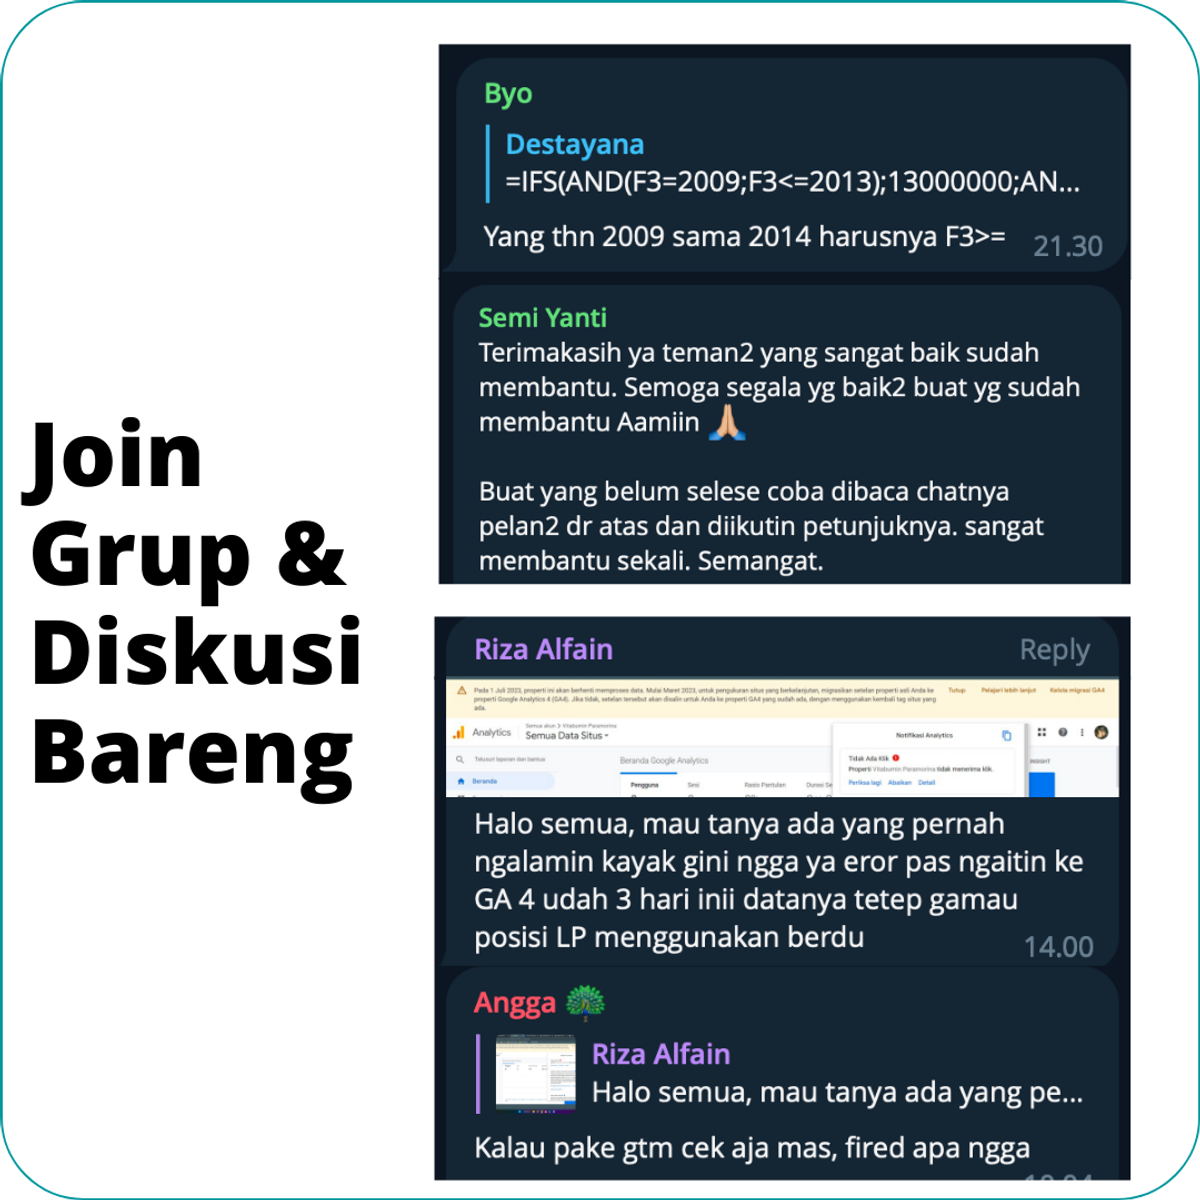 Join Grup